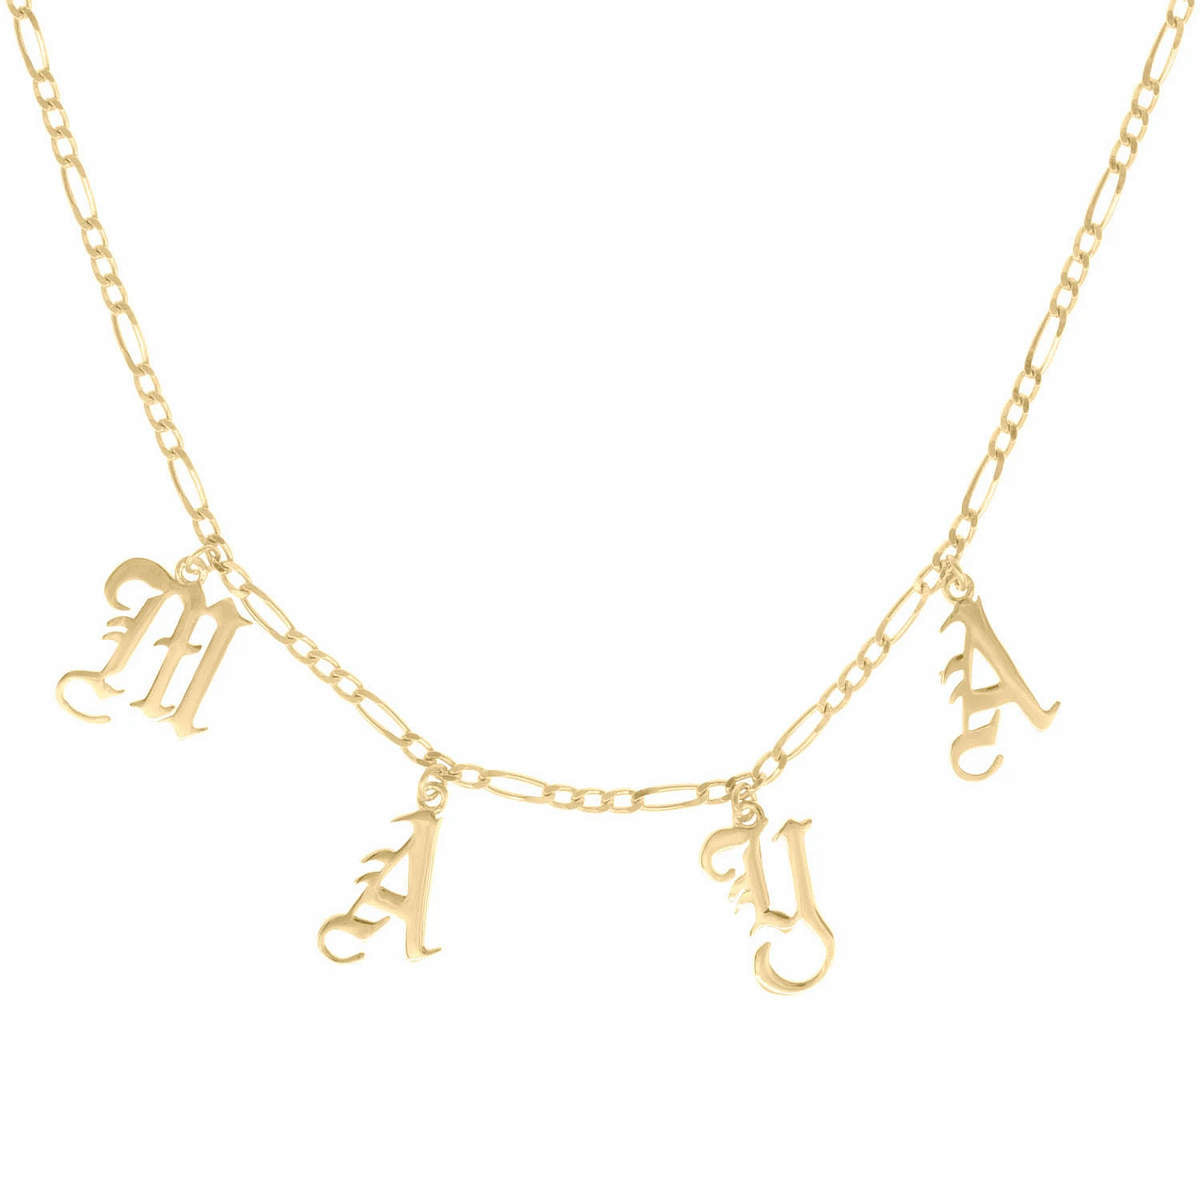 The GOAT Personalized Name Choker